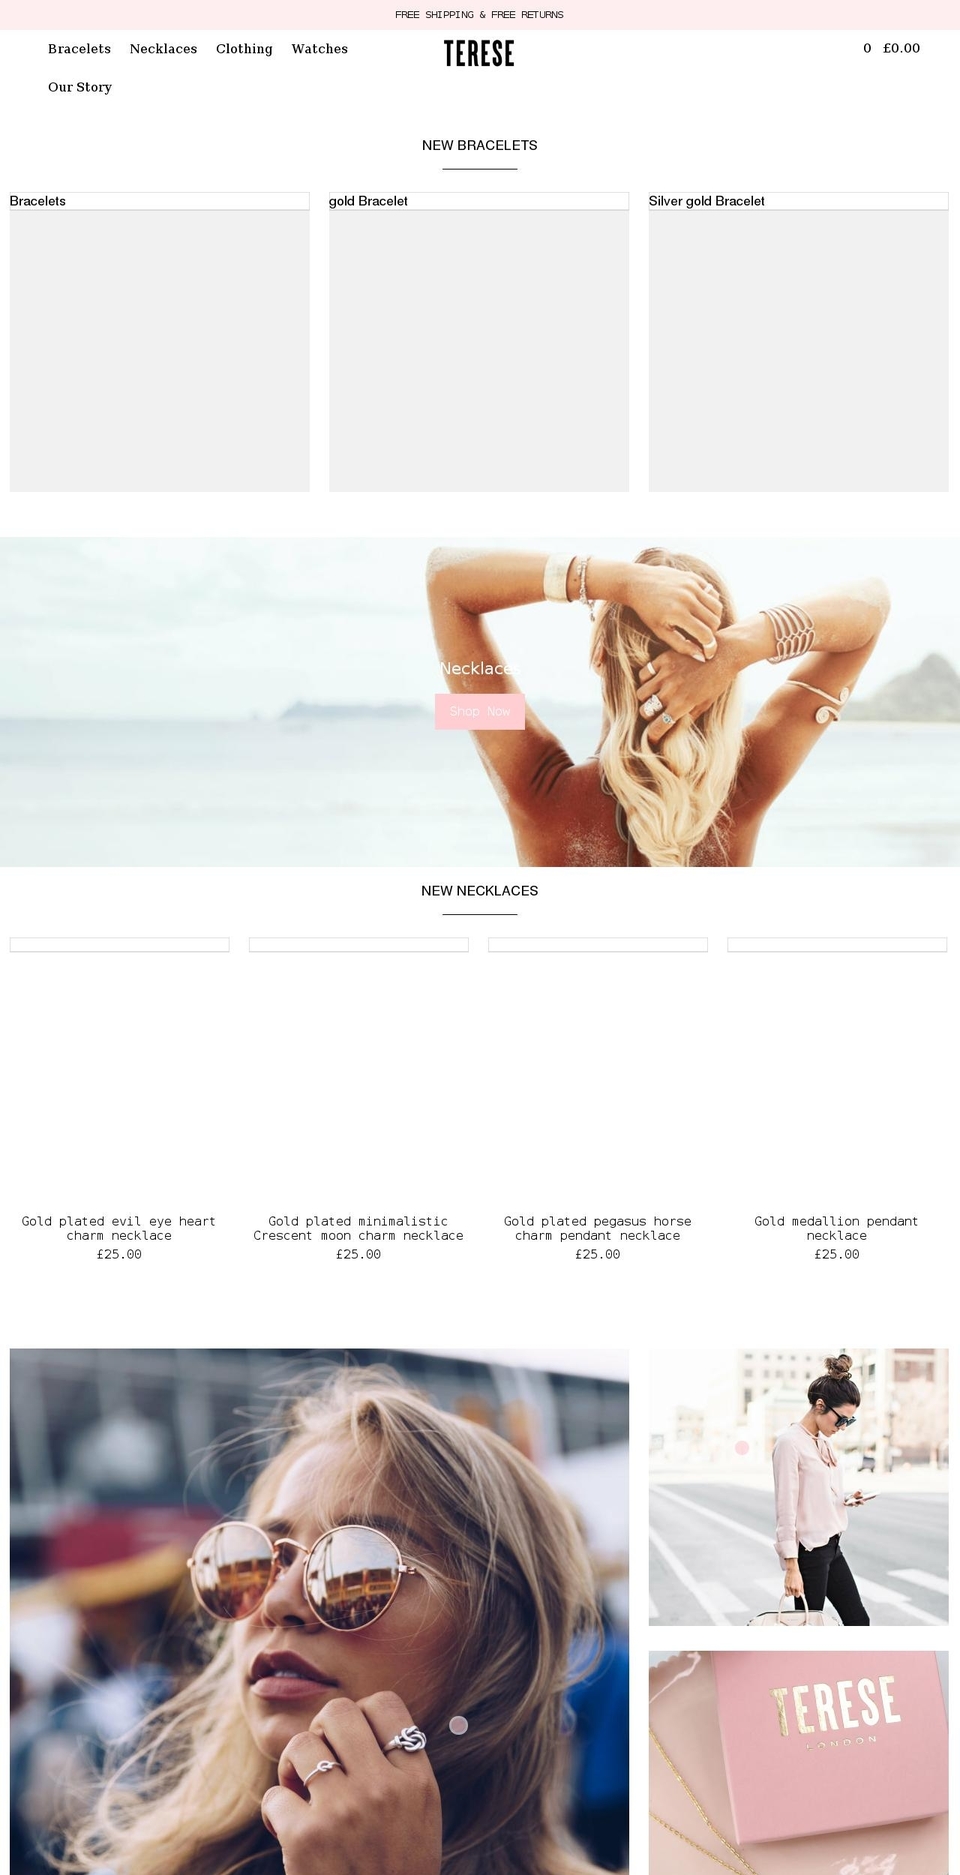 NEW Shopify theme site example terese.com